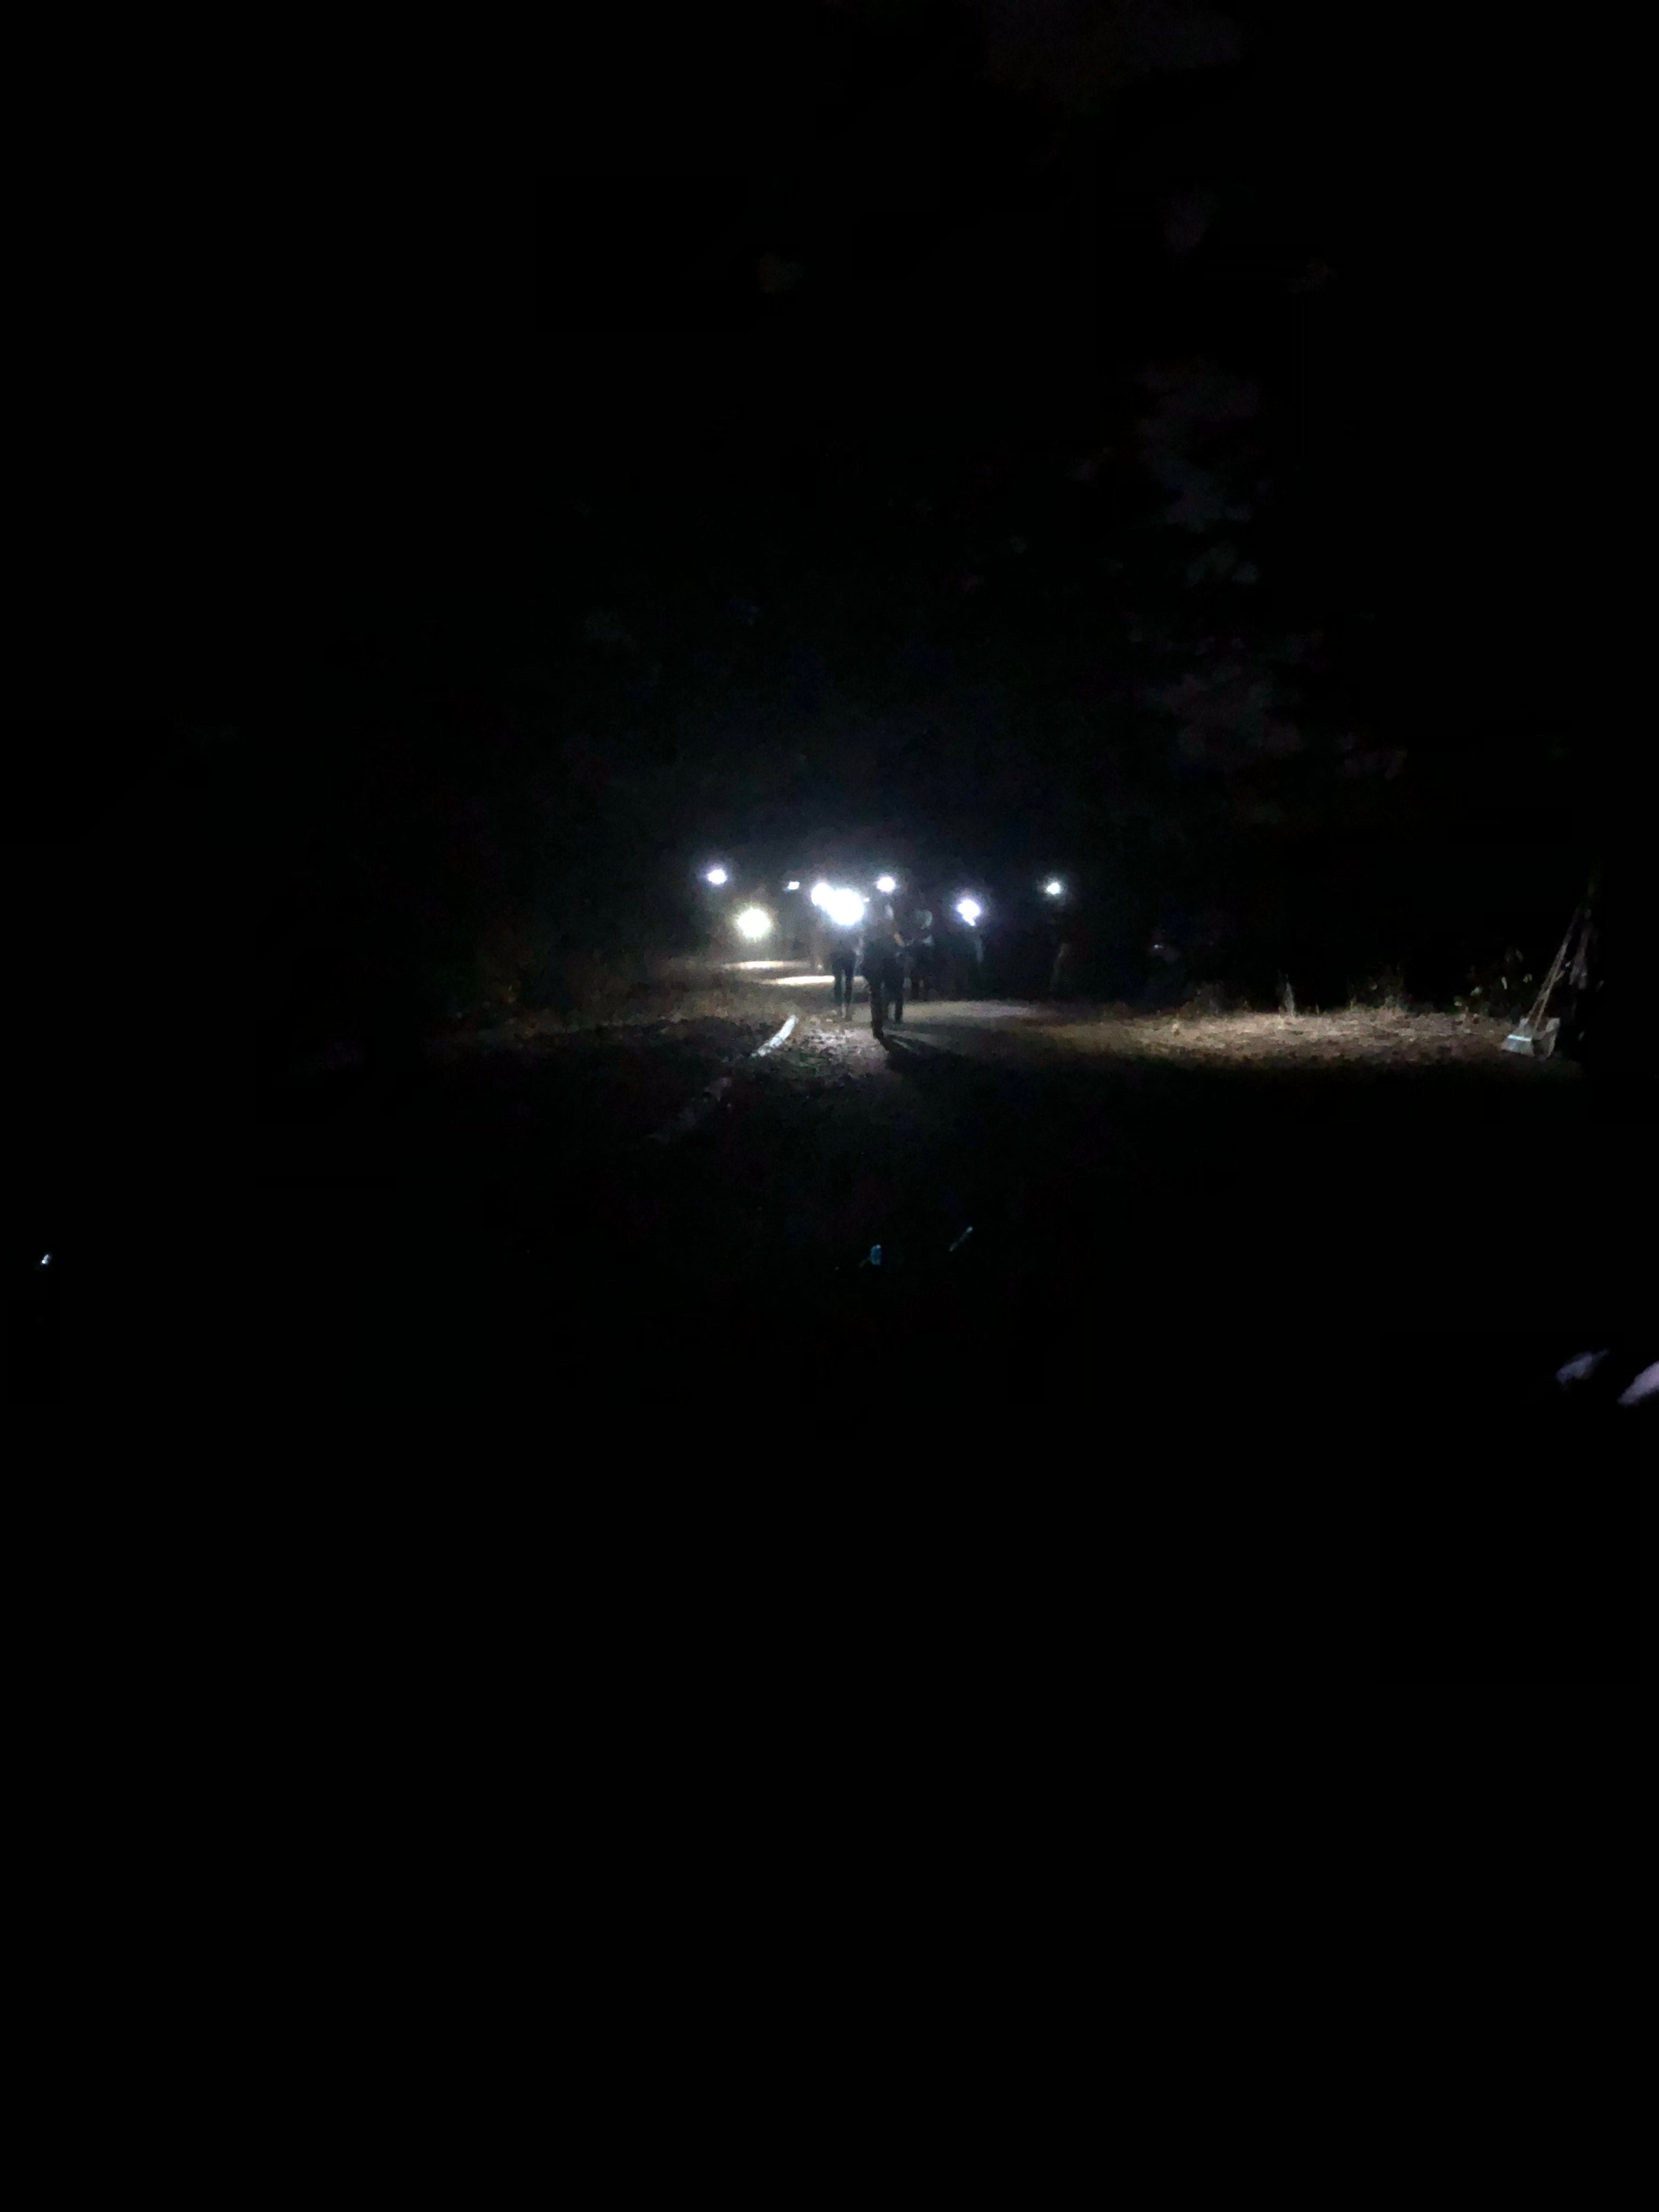 people with head lamps on, walking through the darkness